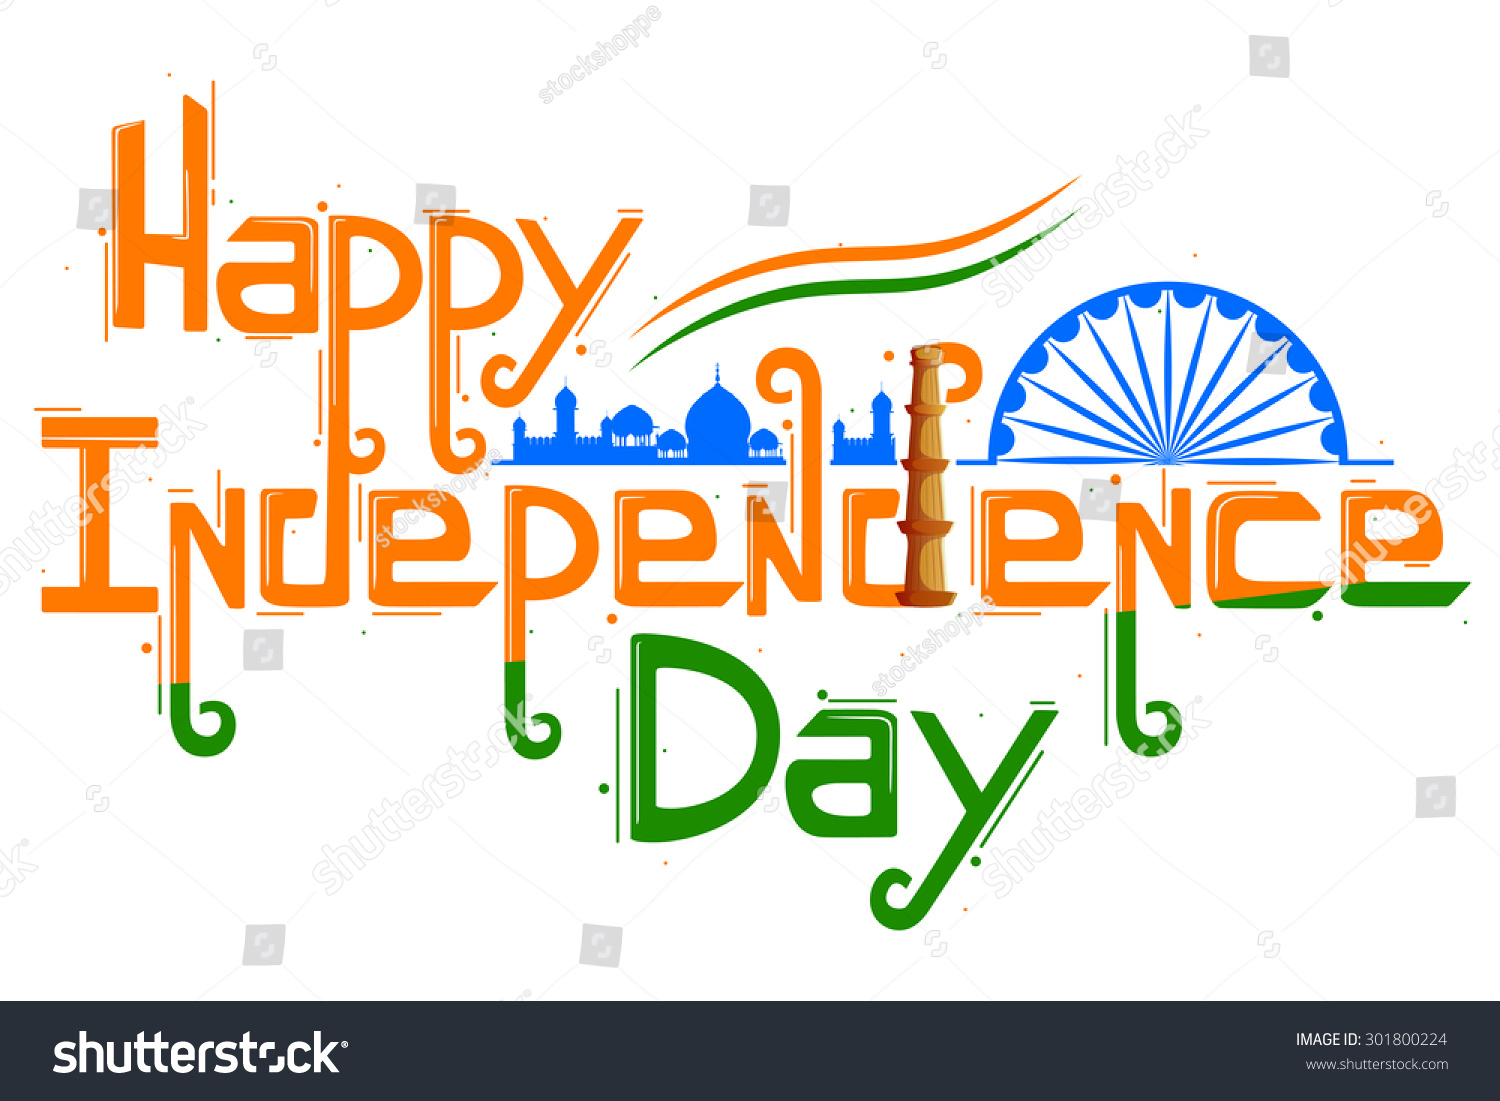 clipart on independence day - photo #41